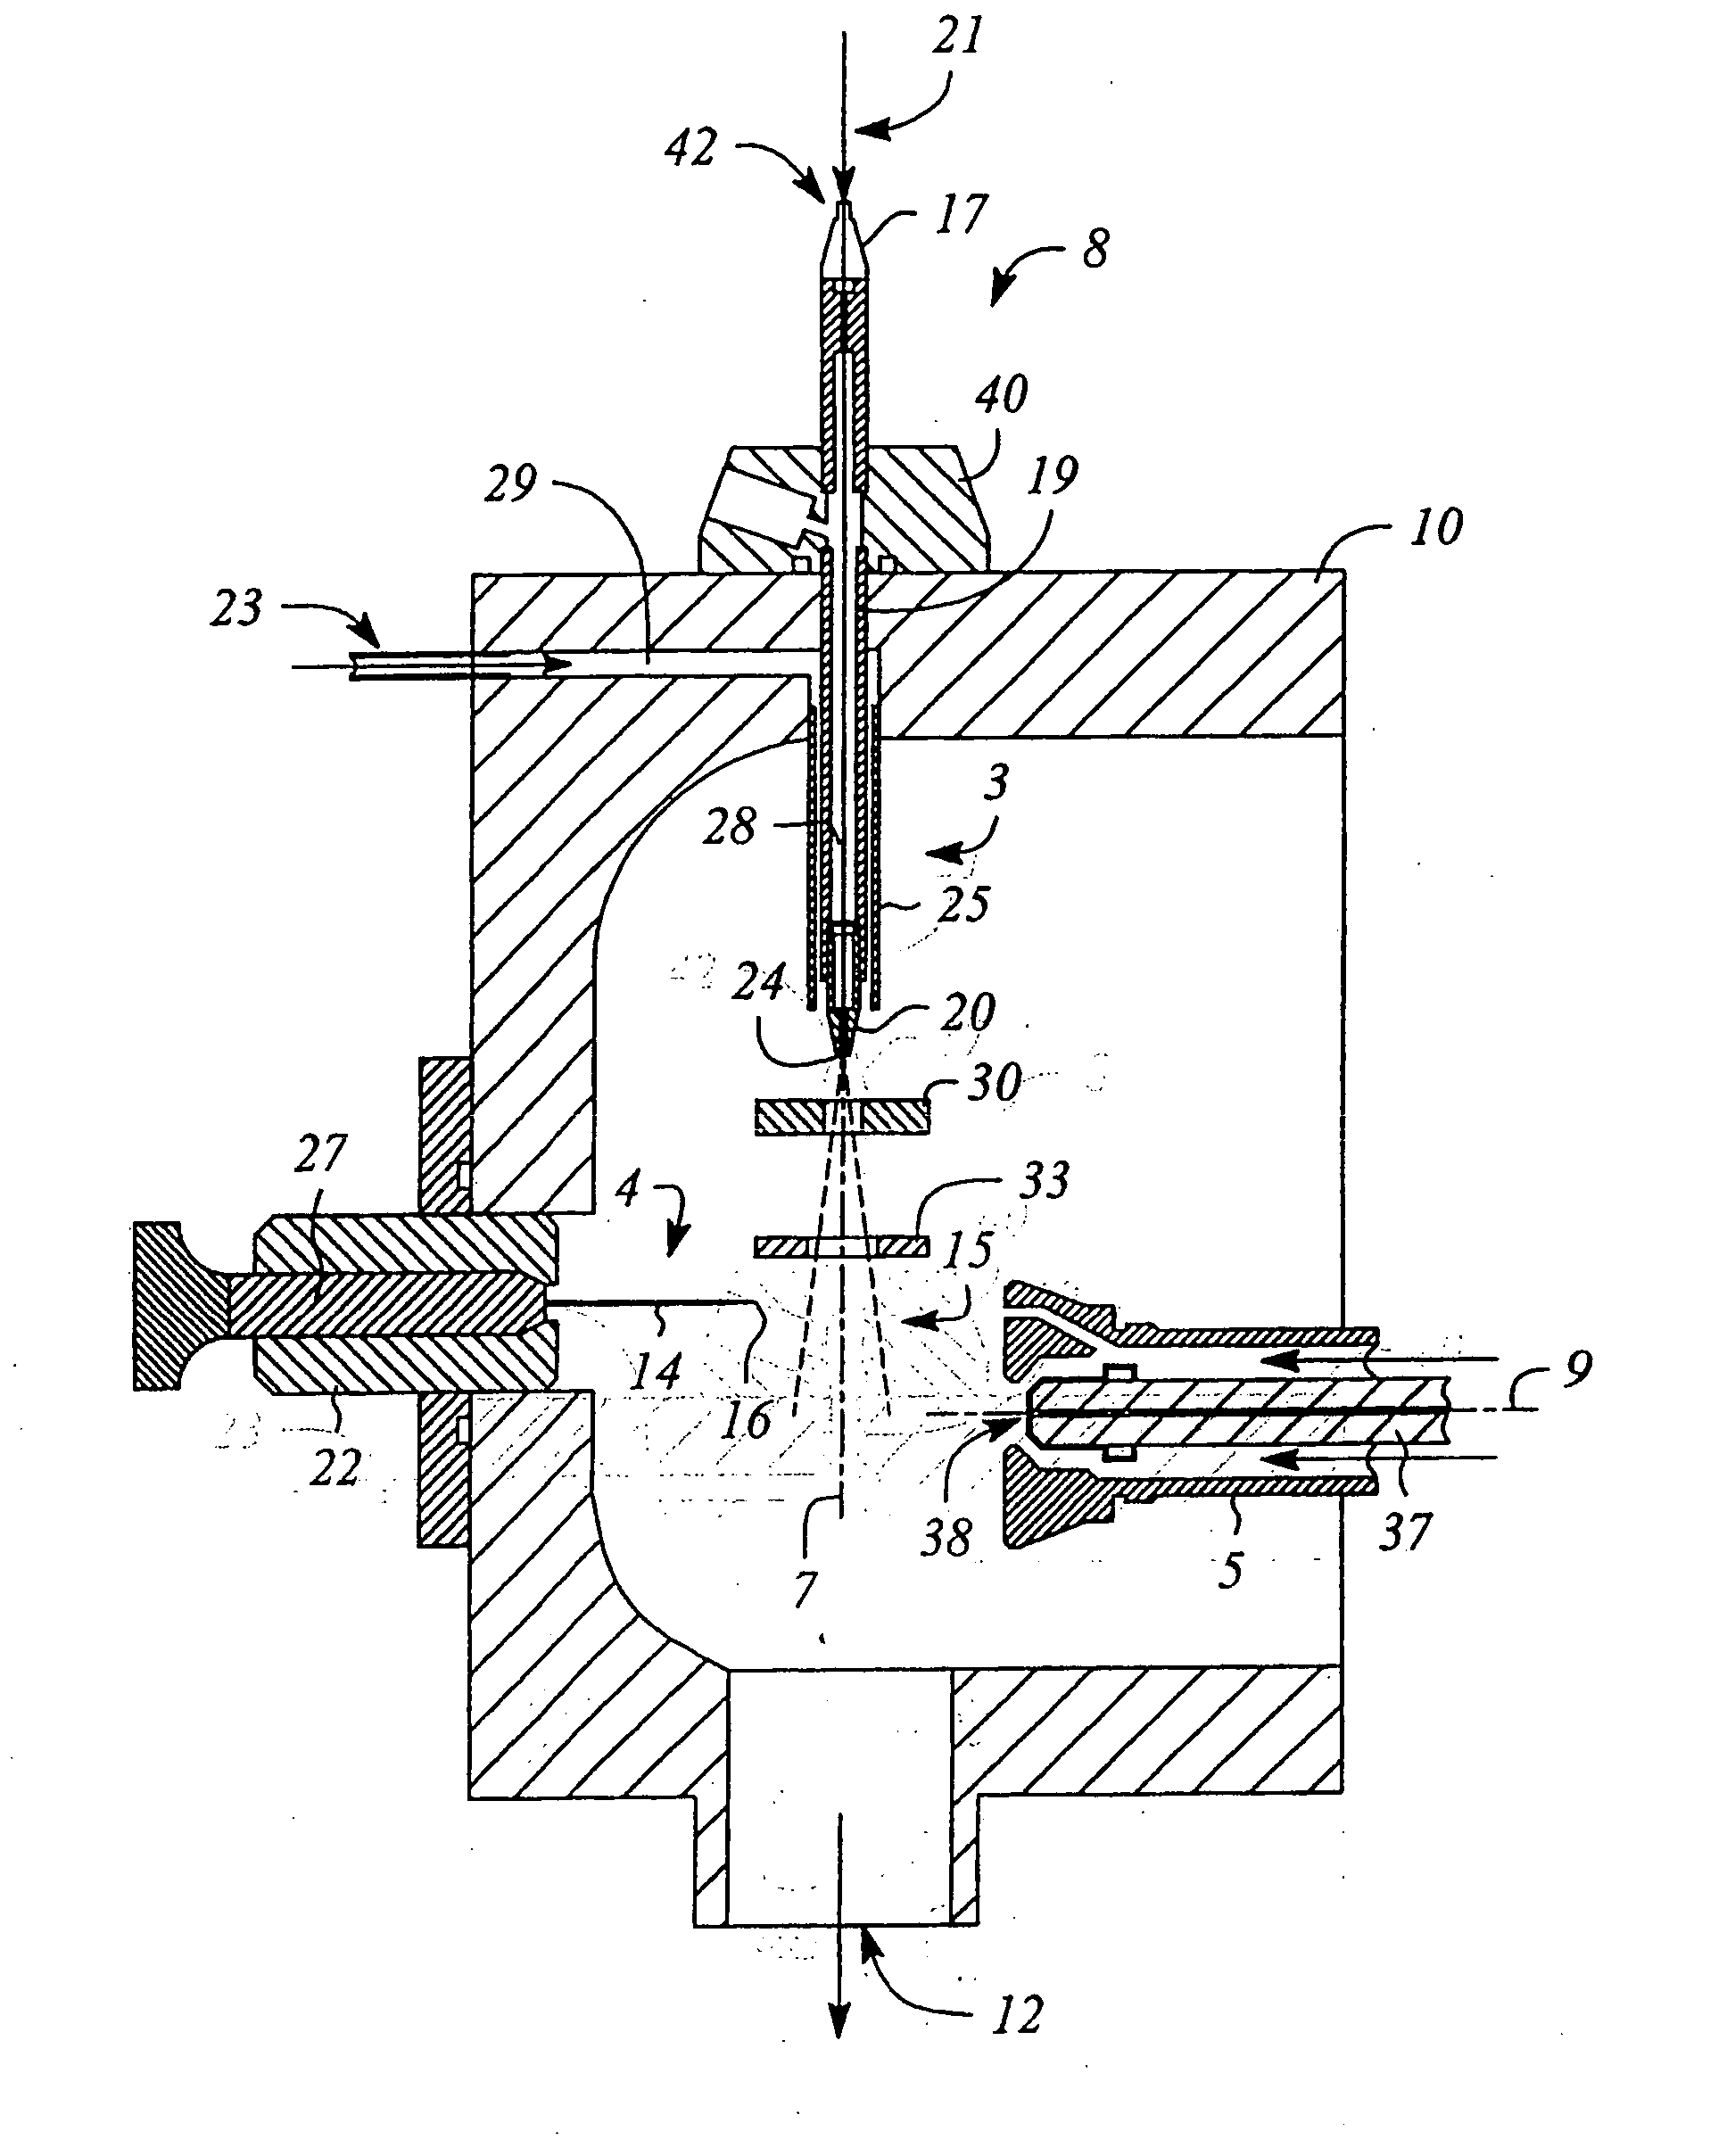 Multimode ionization source and method for screening molecules